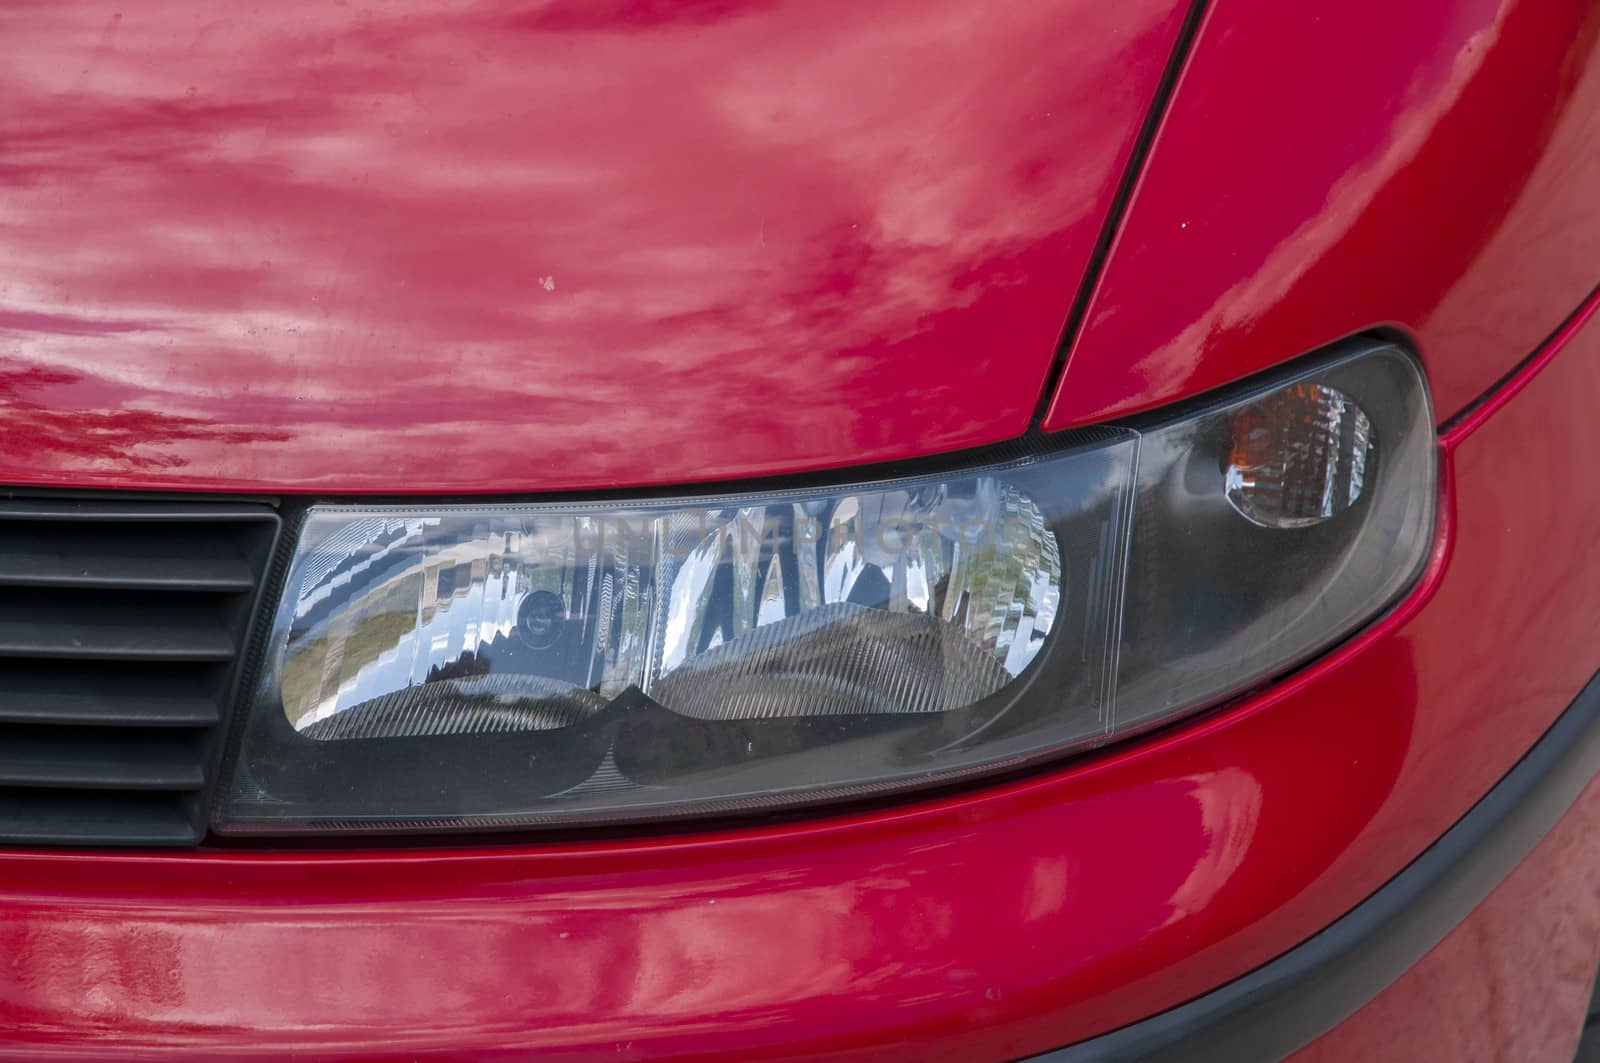 headlight of a red car